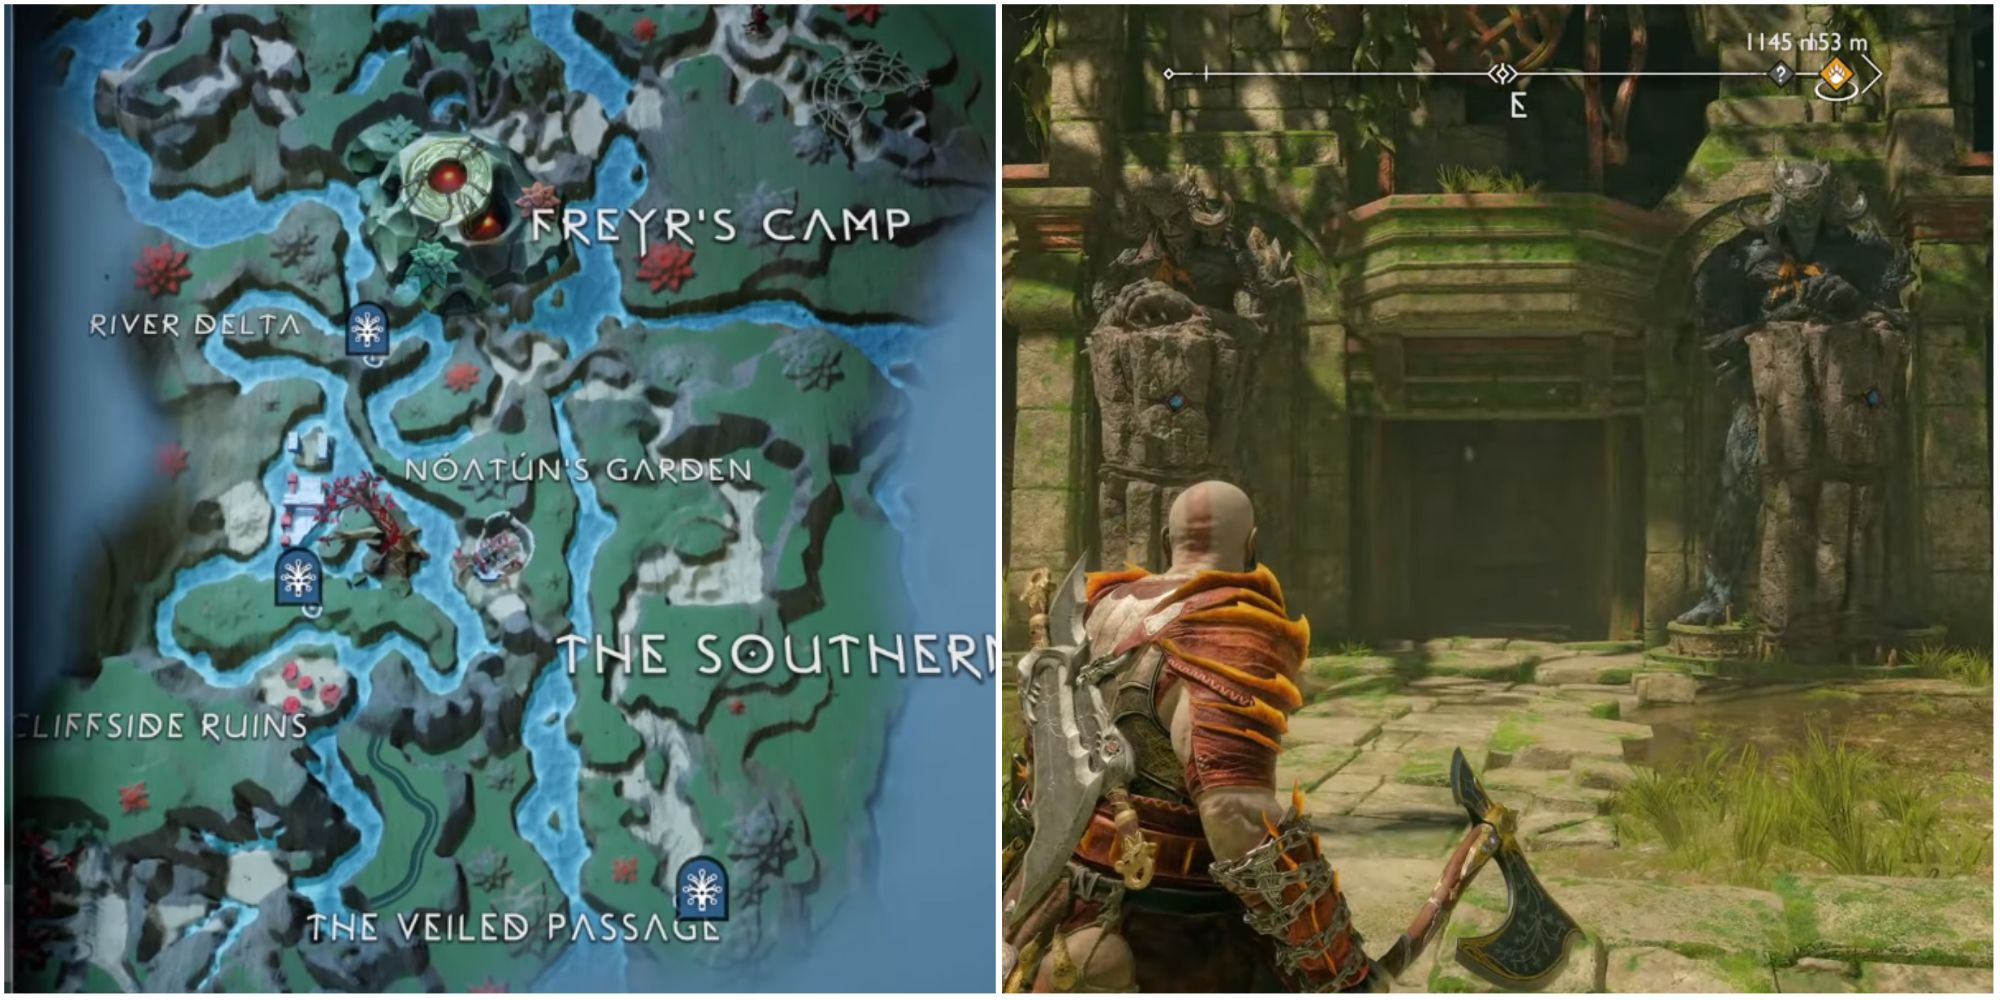 Split image showing the location of the Troll Statues in Vanaheim.